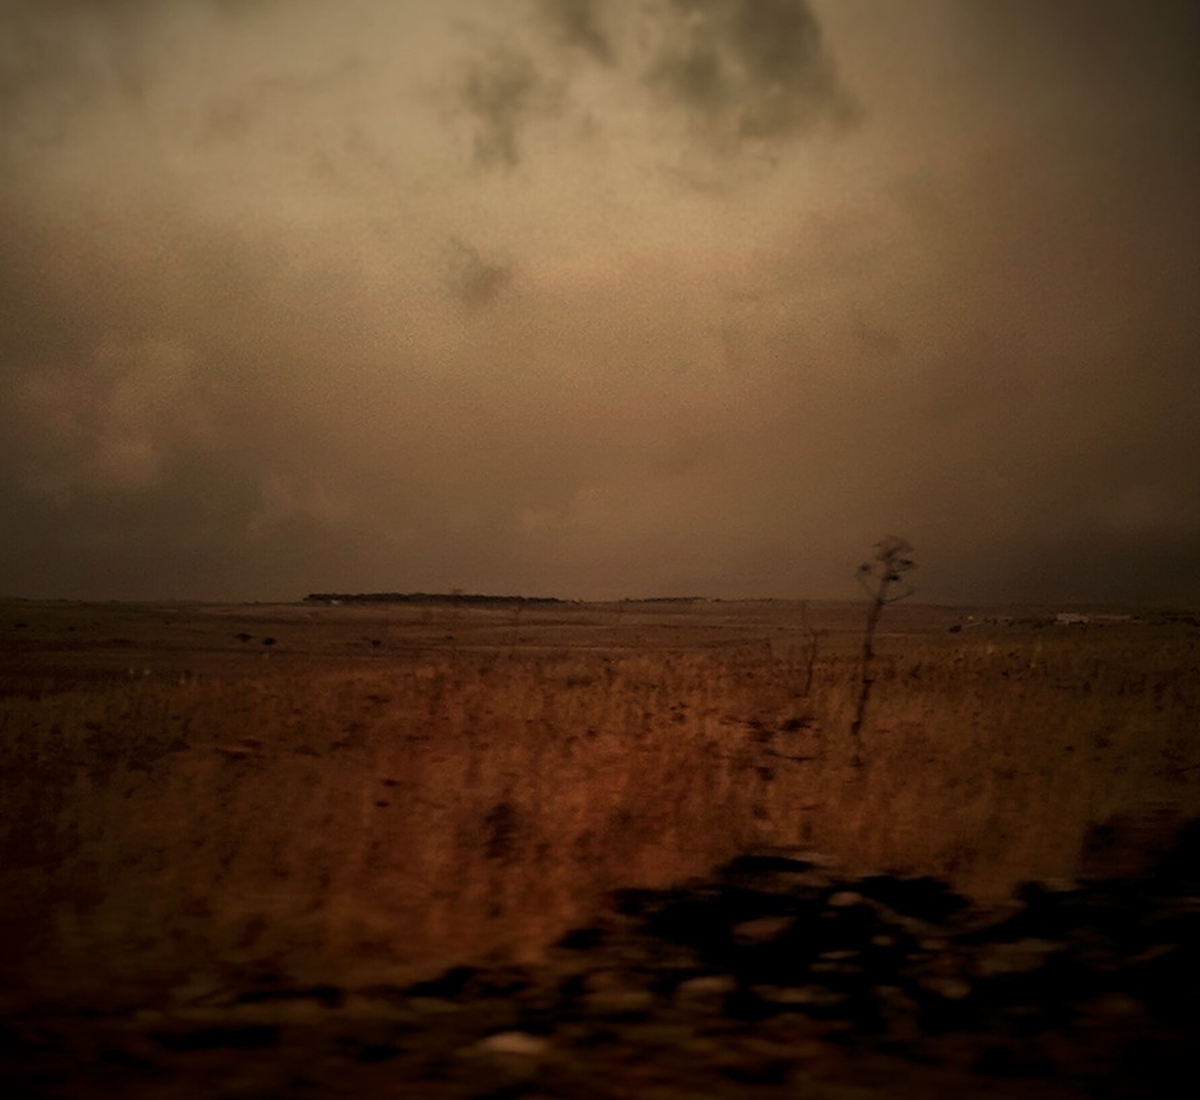 On the road Travel wild desolate landscapes Nature stormy SKY clouds sunset